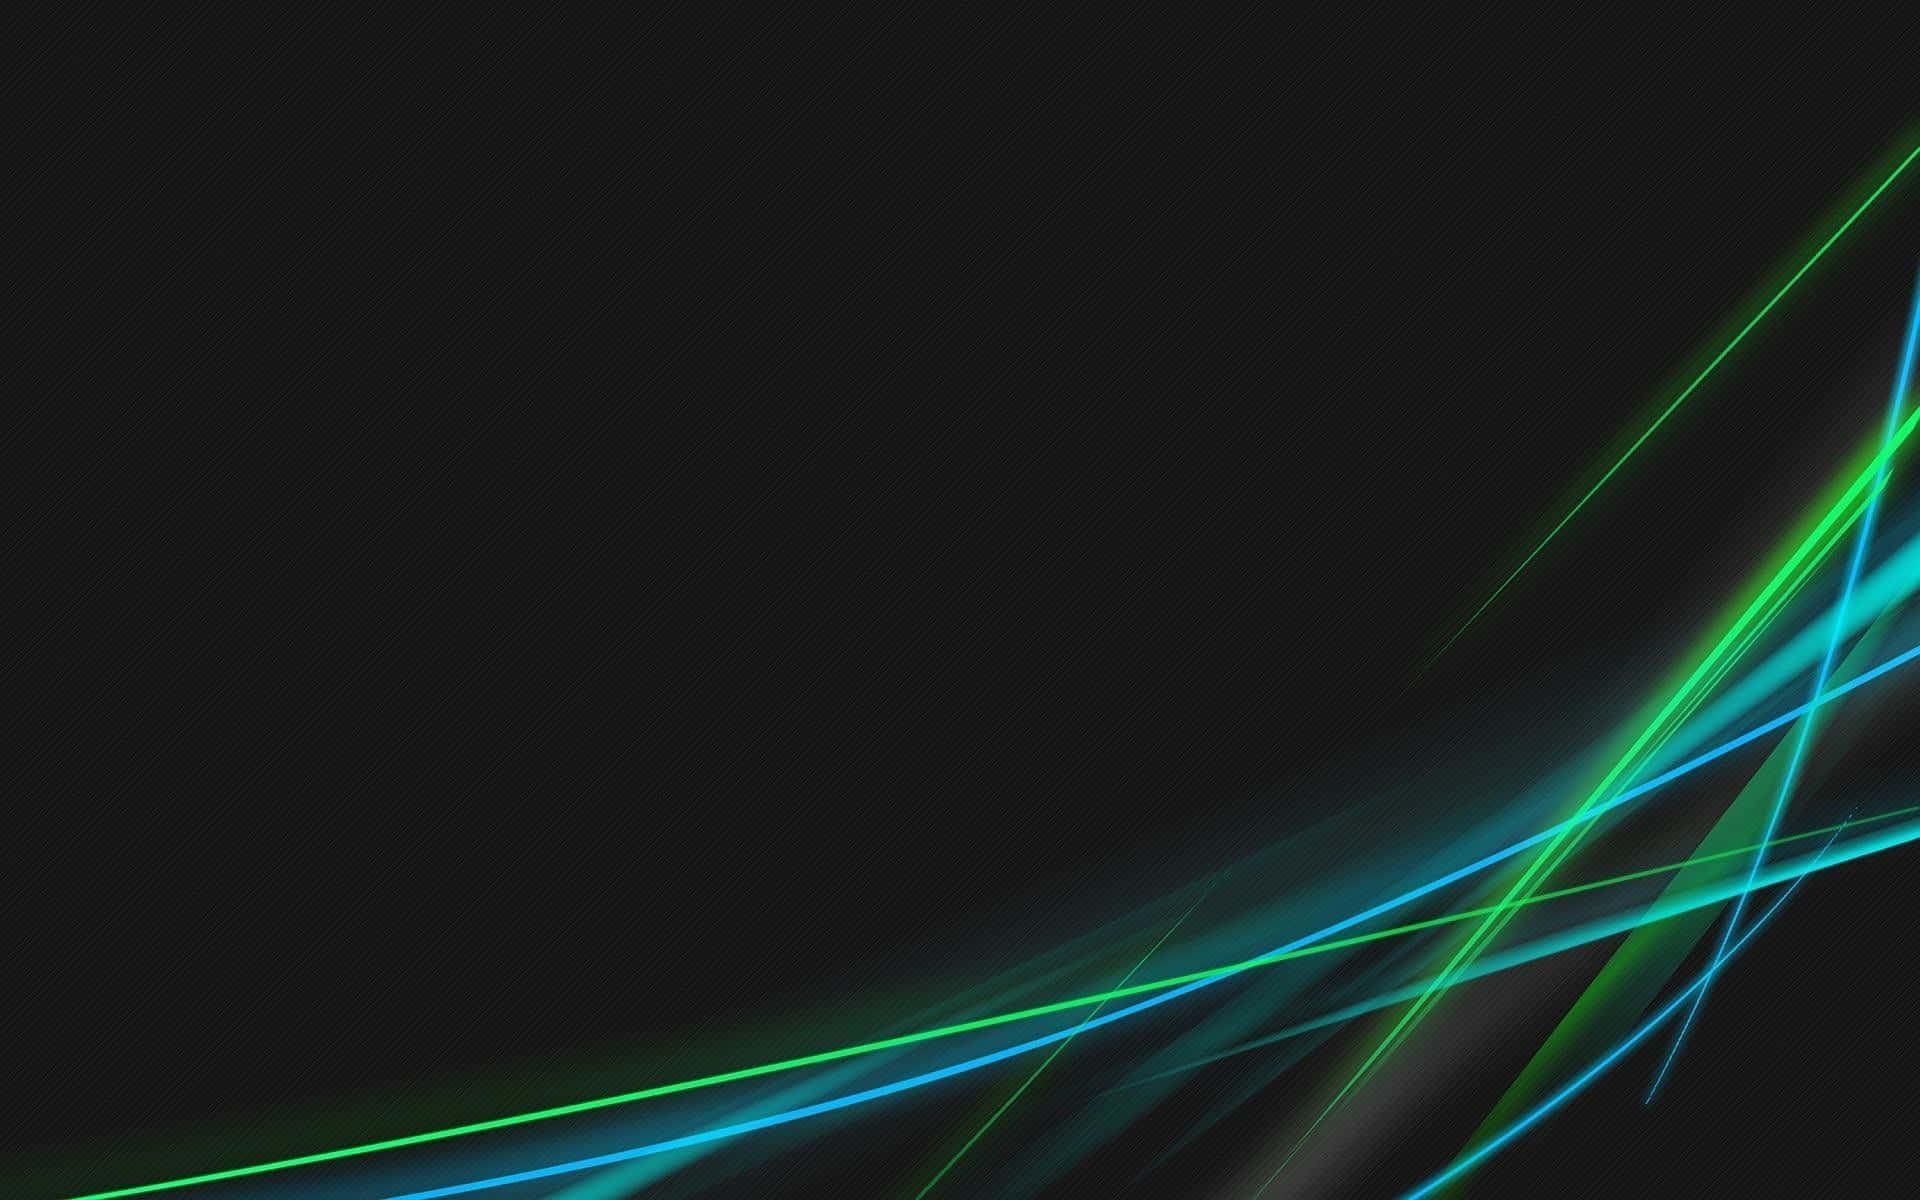 A Black Background With Green And Blue Lines